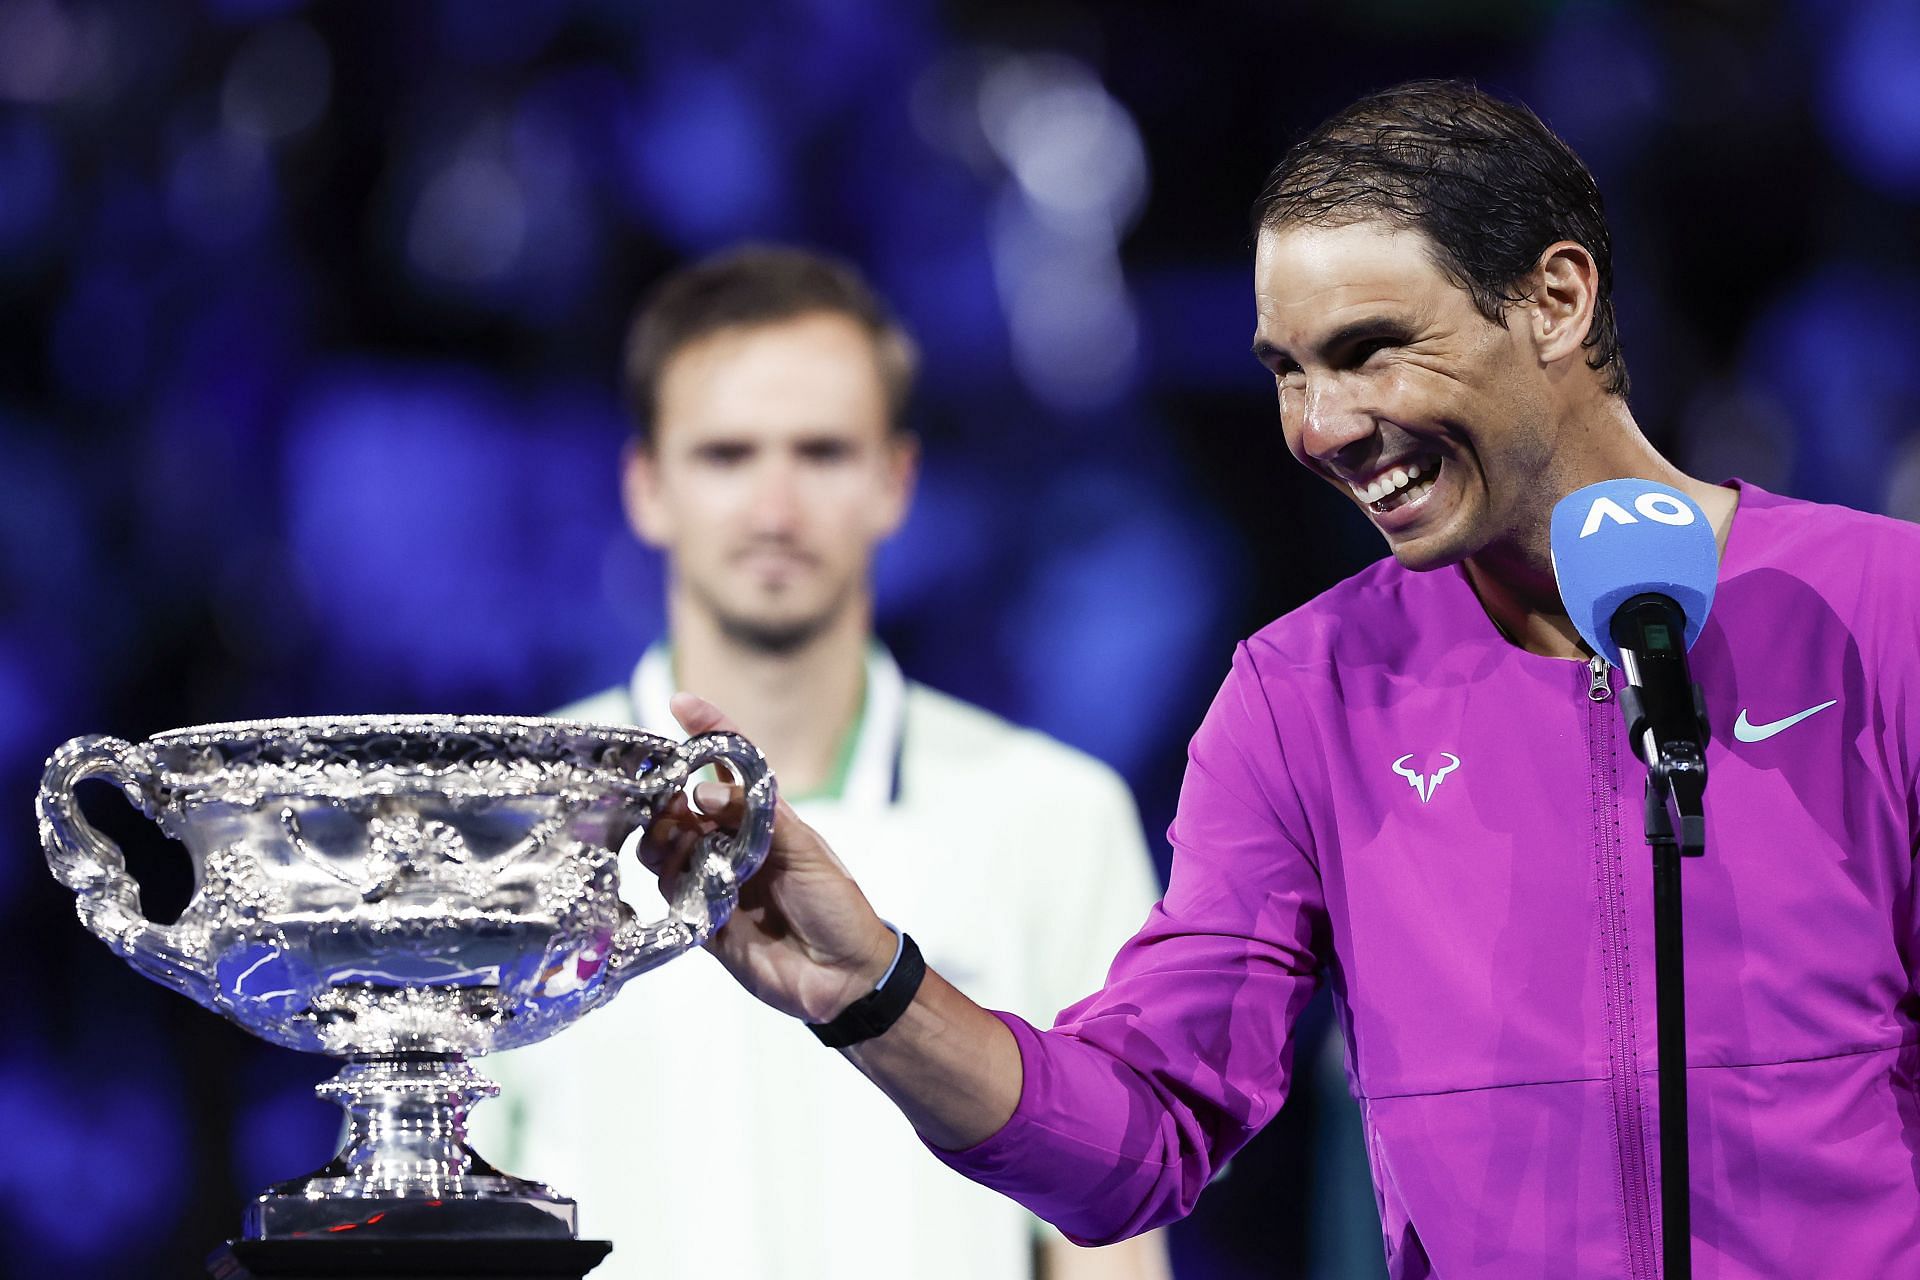 Nadal at the 2022 Australian Open trophy presentation ceremony.